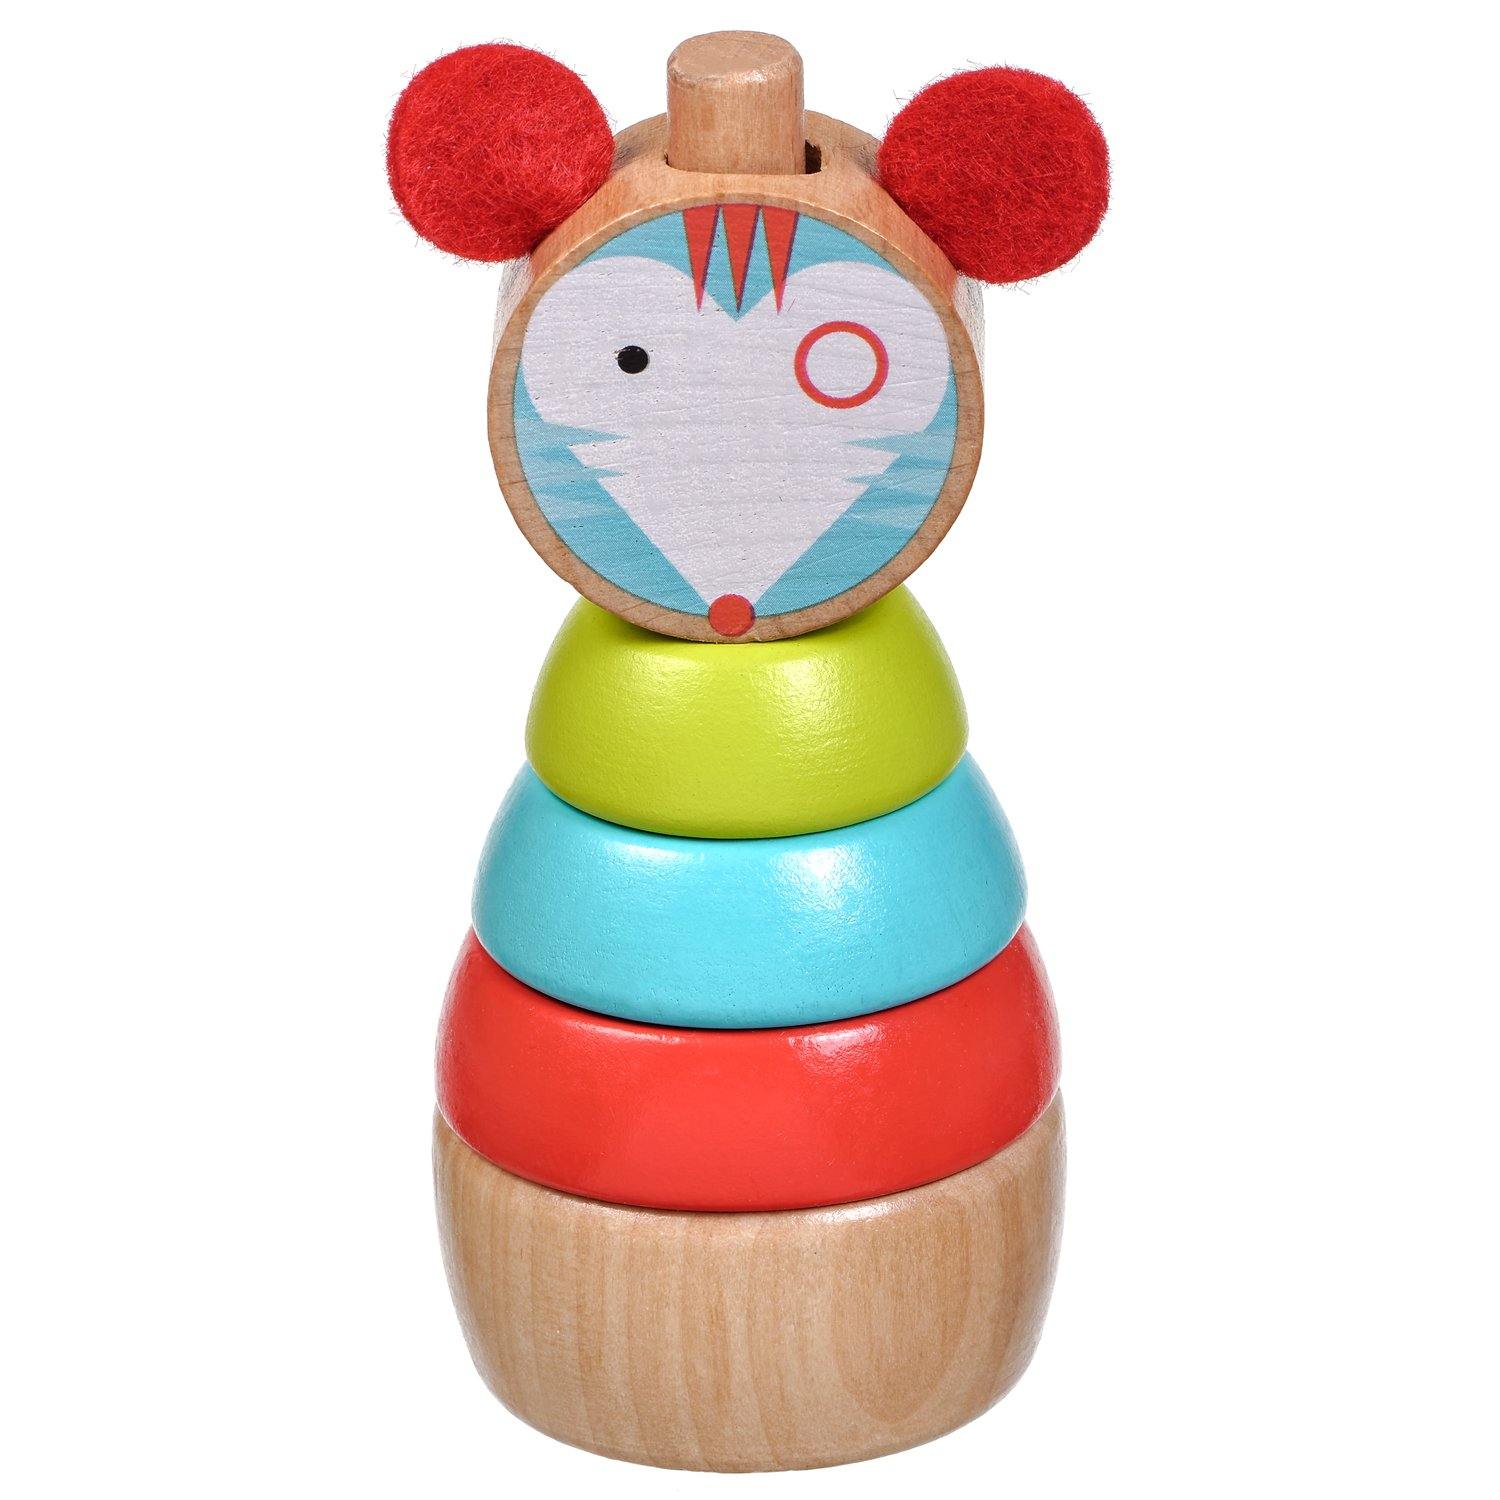 Mouse stacker - wooden toy set - T&M Toys